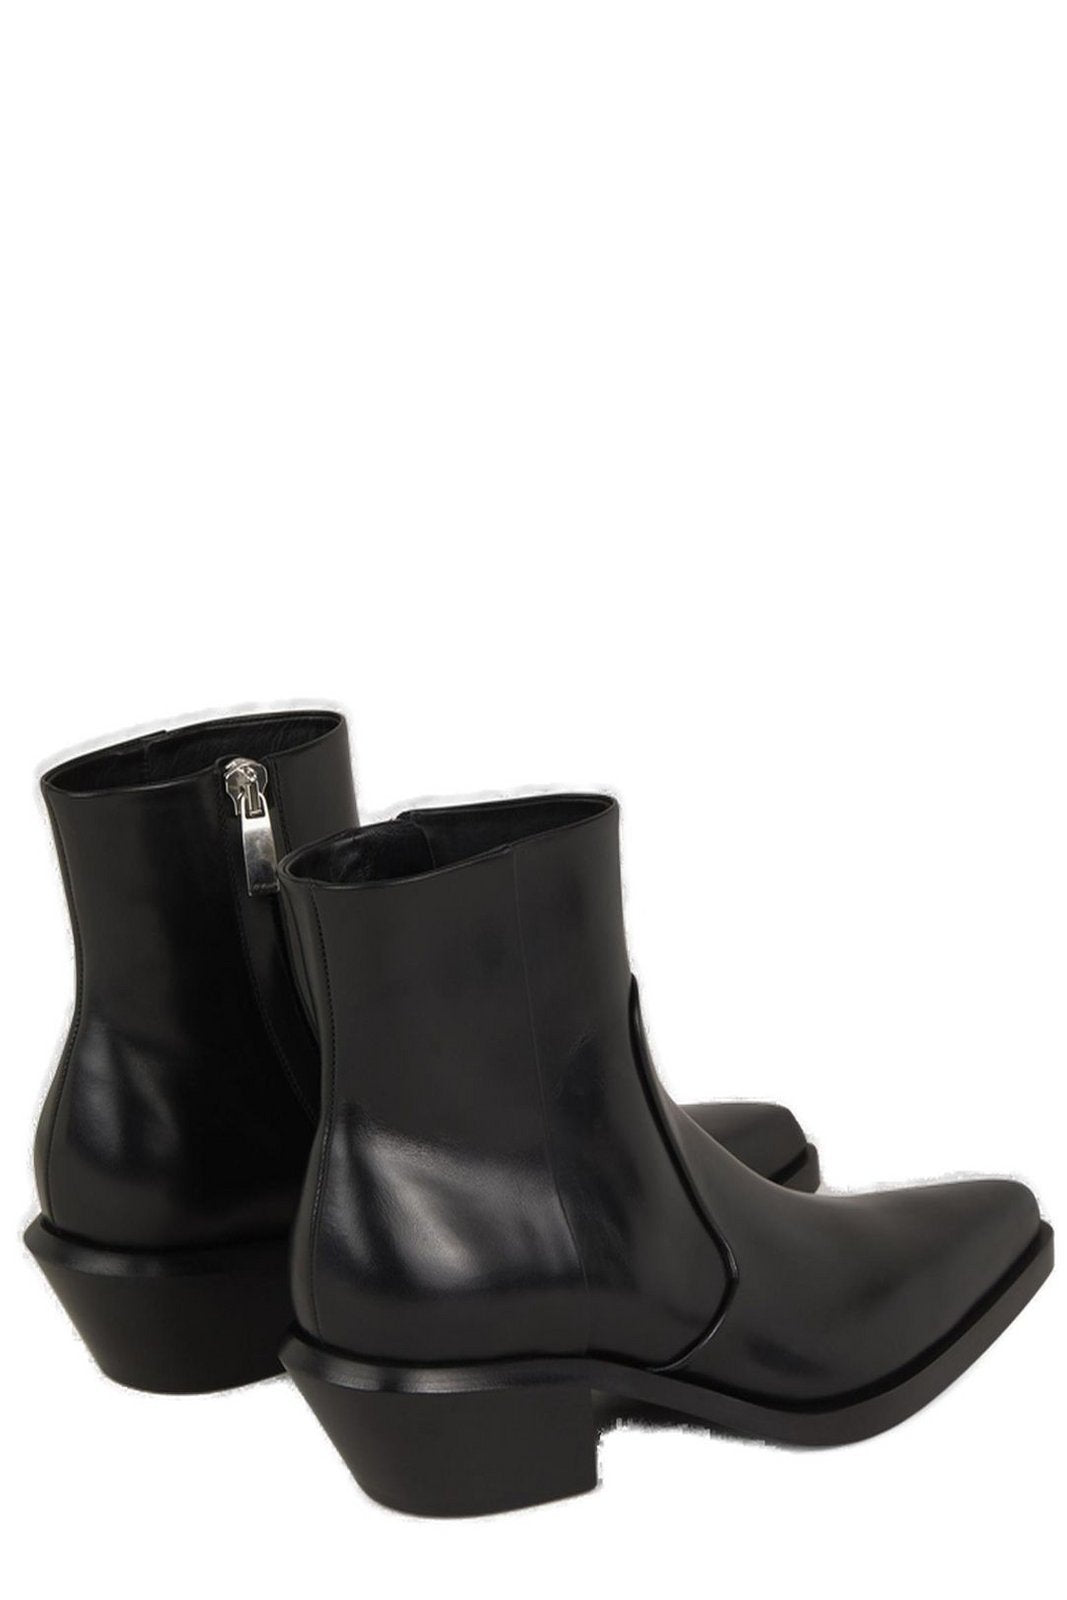 Off-White Zip Detailed Ankle Boots